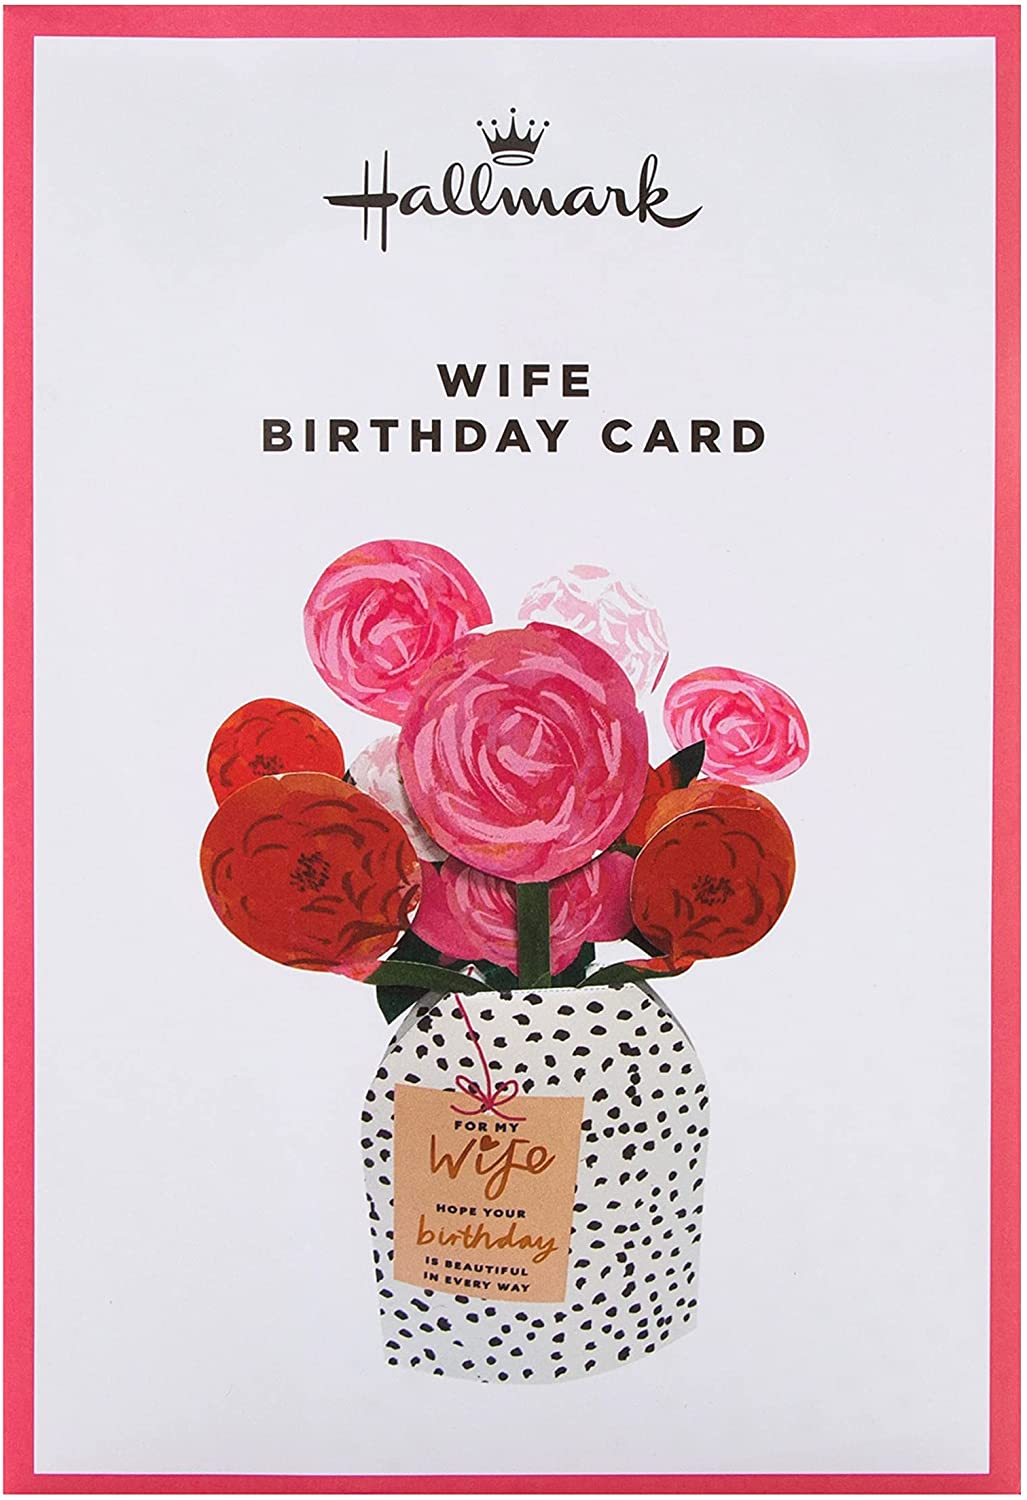 Happy Belated Birthday Wishes Pink Rose Bouquet Of Roses Hallmark